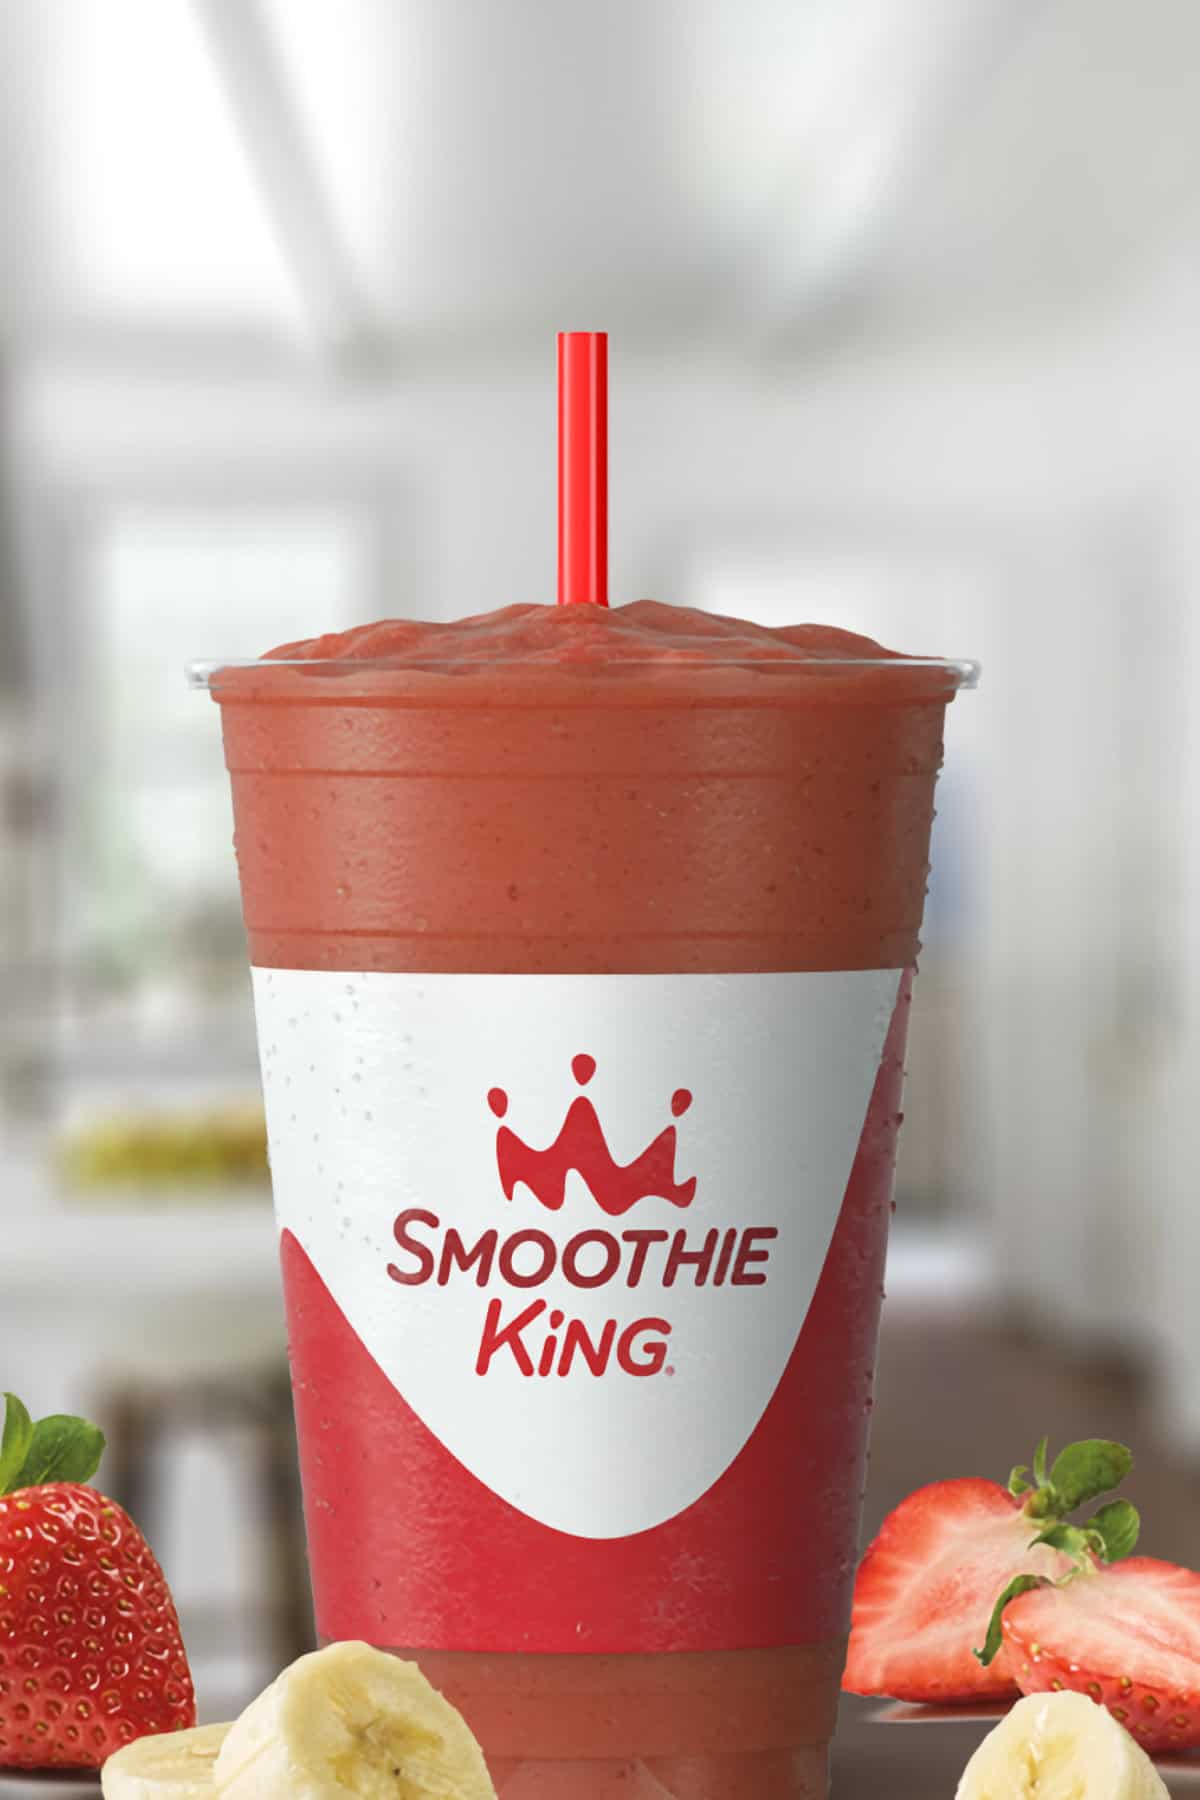 Smoothie King Kids CW Jr smoothie in a glass, on my kitchen counter, surrounded by fresh strawberries and bananas.